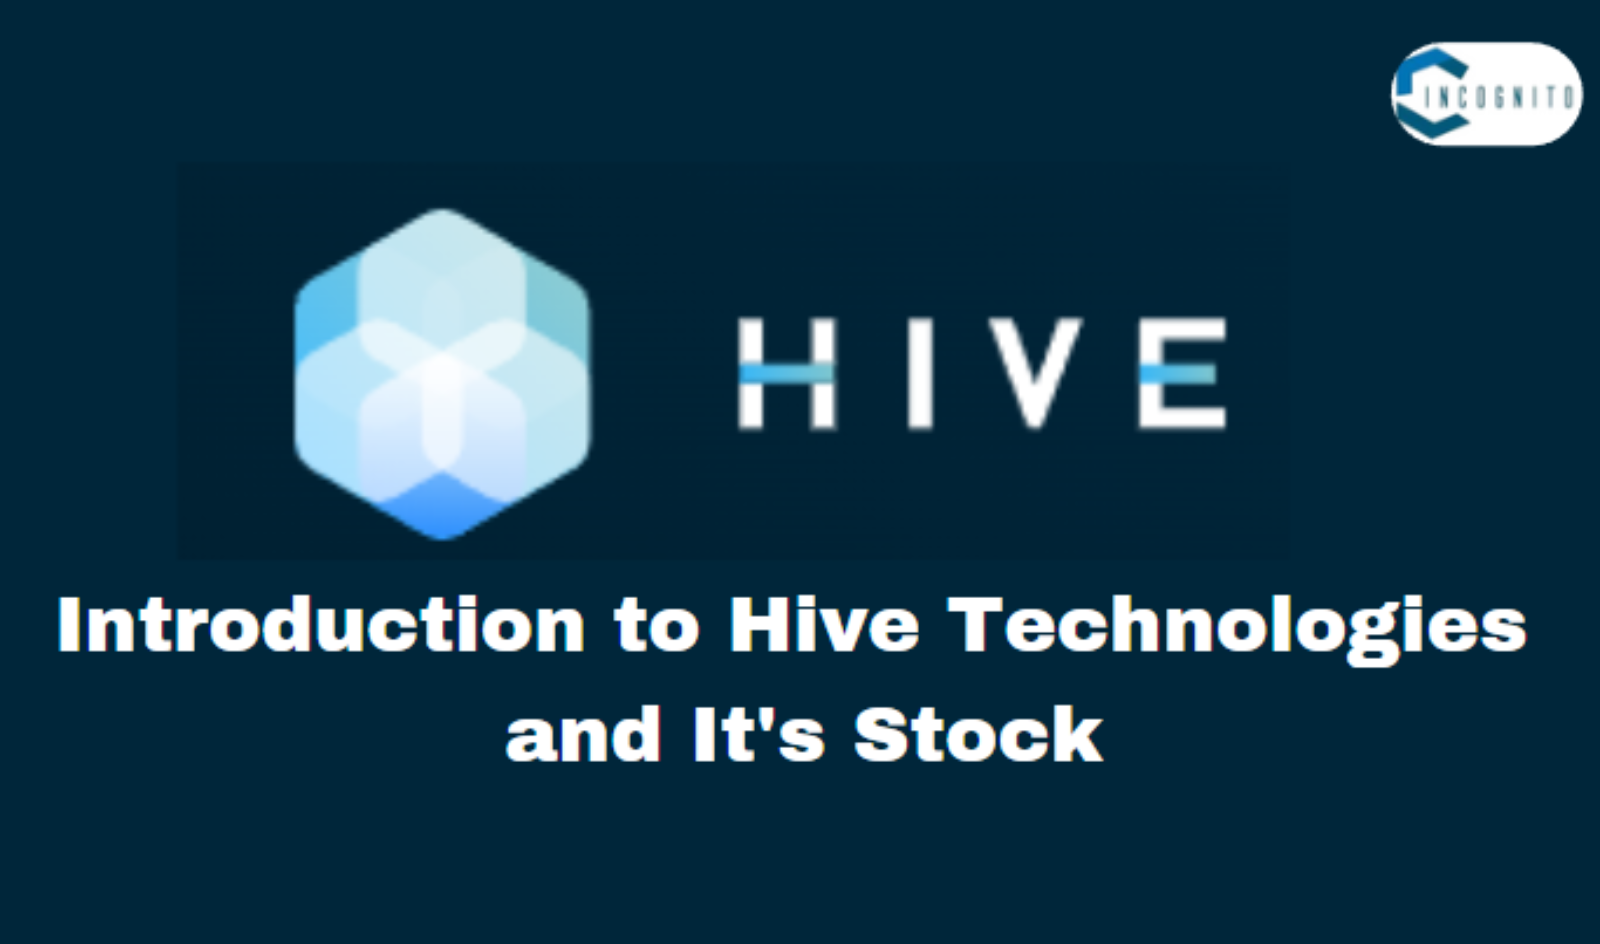 Introduction to Hive Technologies and Its Stock